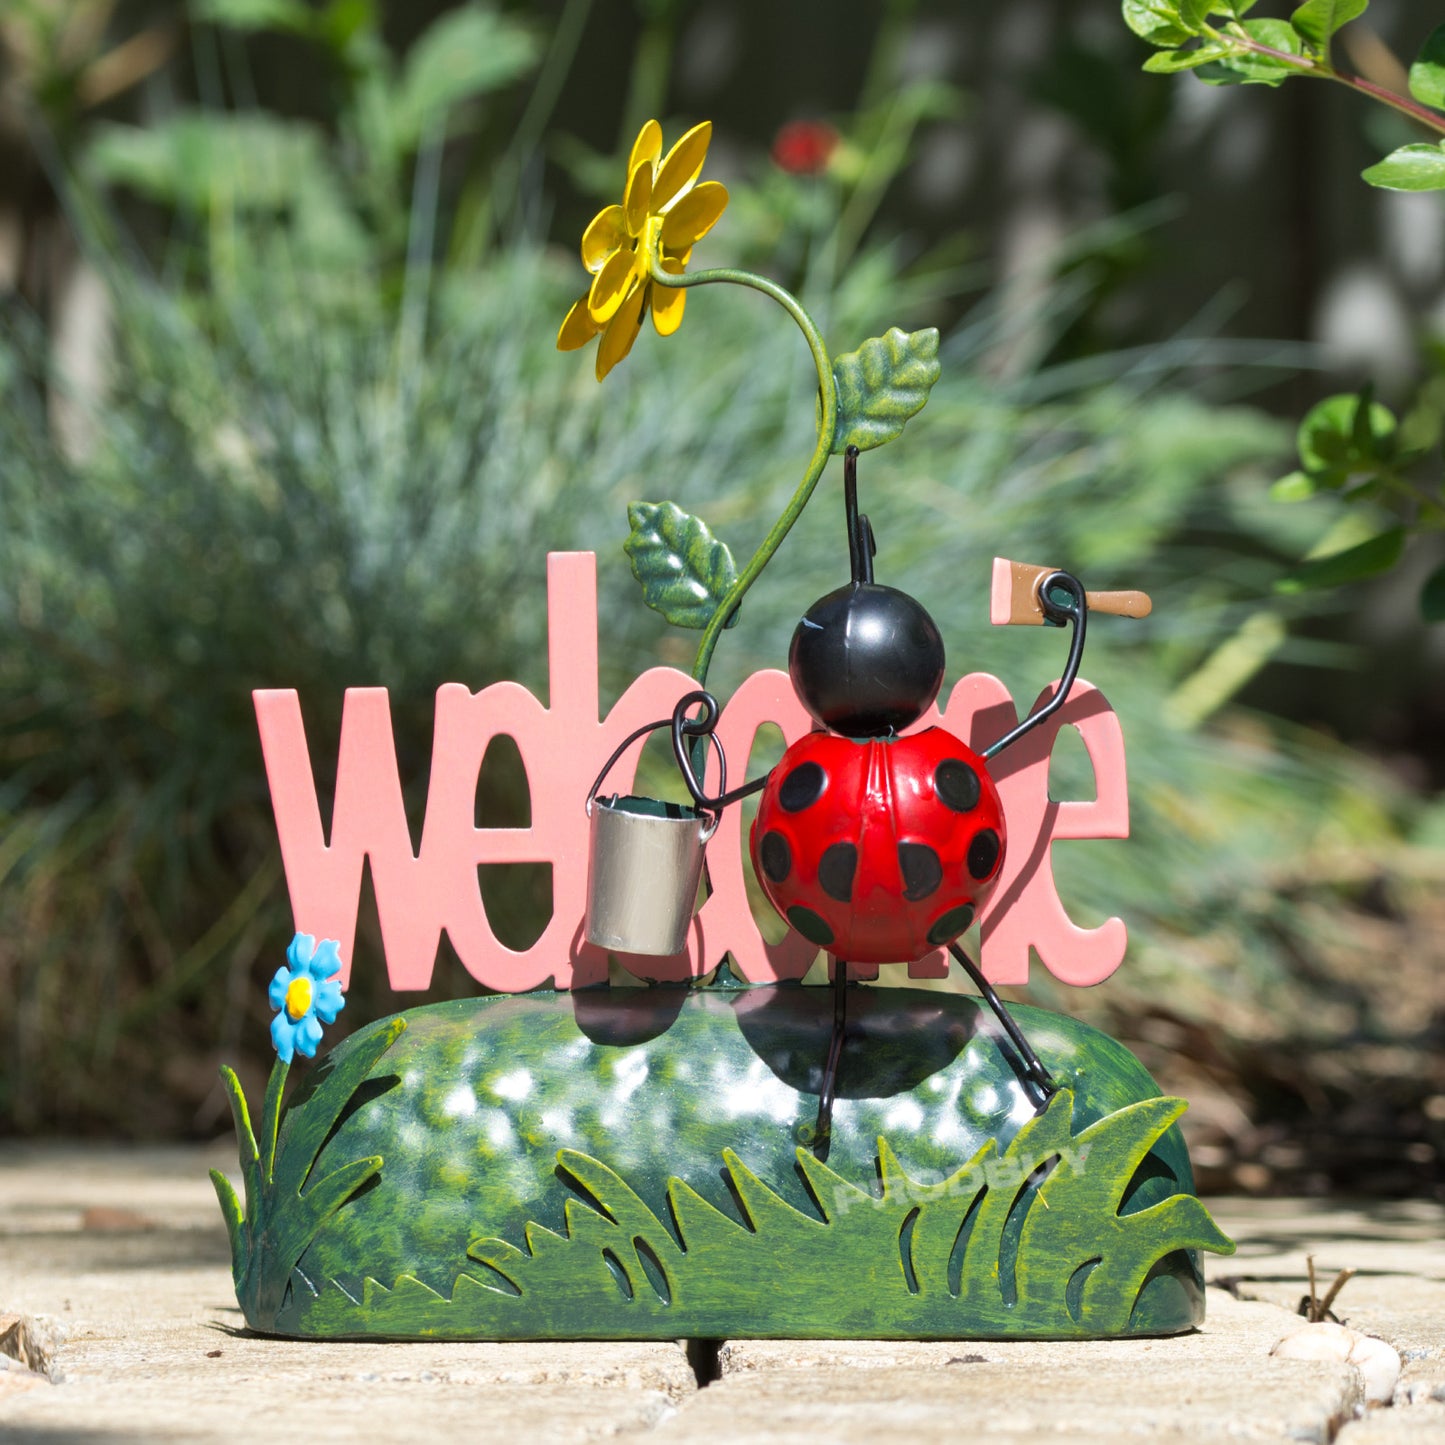 Ladybird Painting Welcome Sign Small Metal Garden Ornament Decoration